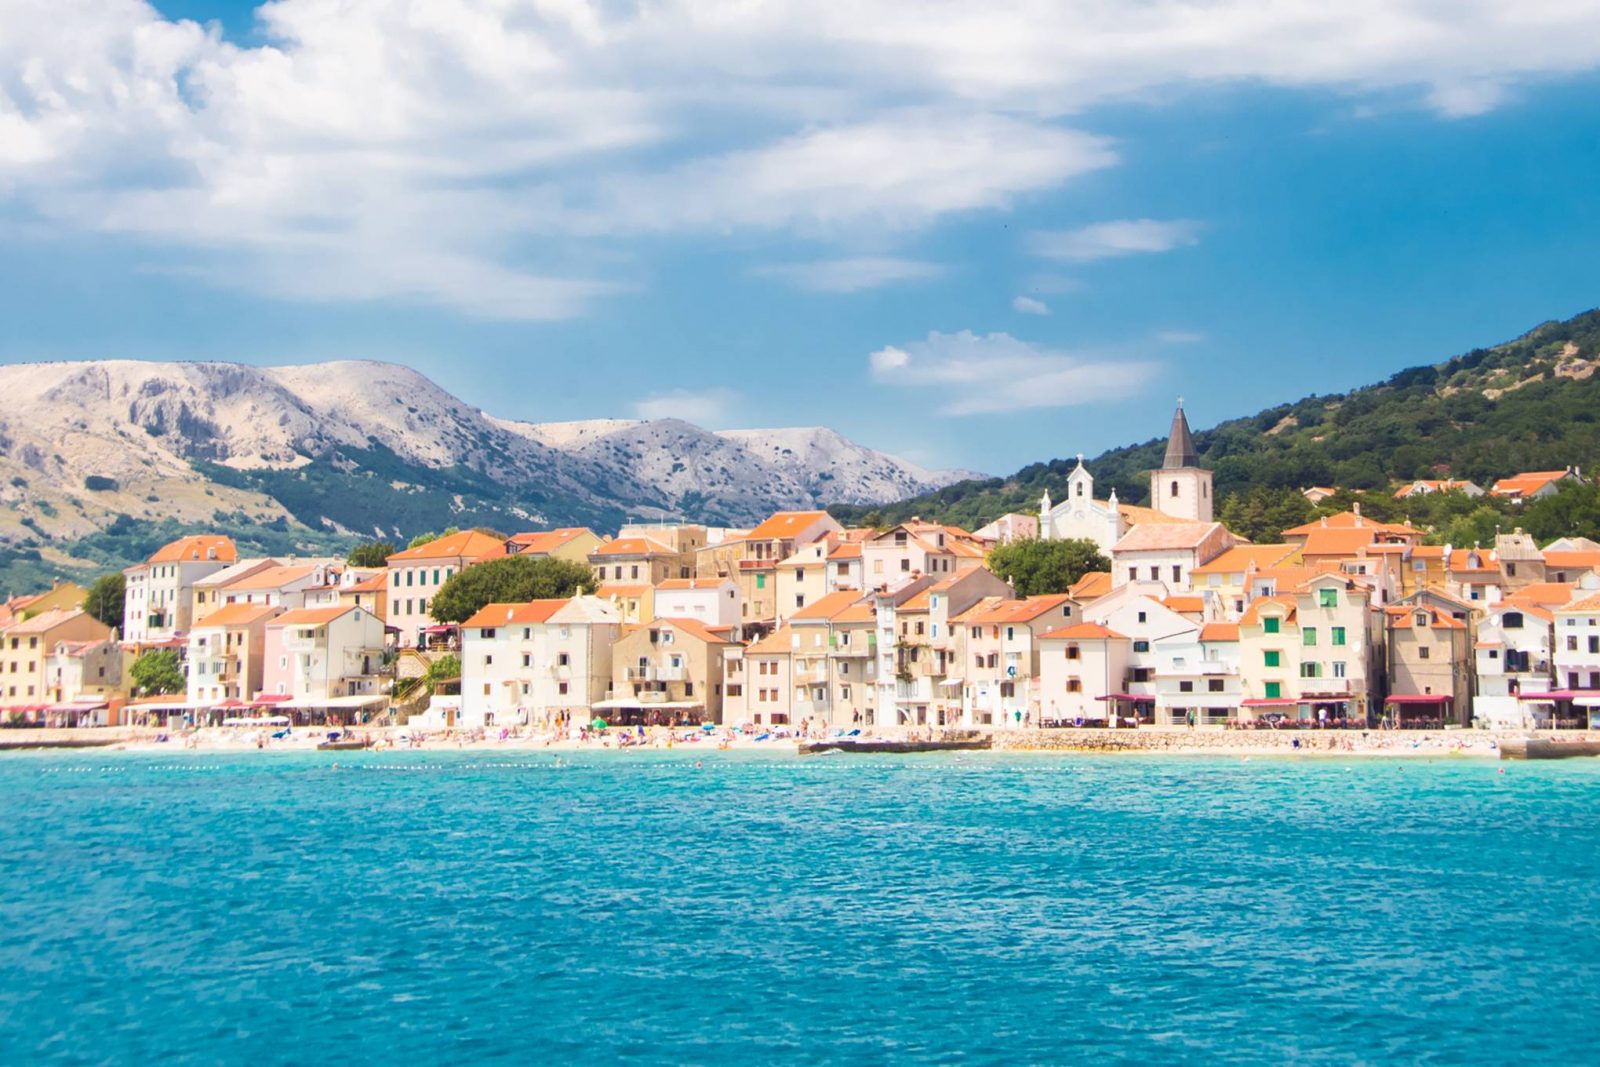 Do You Have the Smarts to Get an ‘A’ On This Geography Test? Croatia